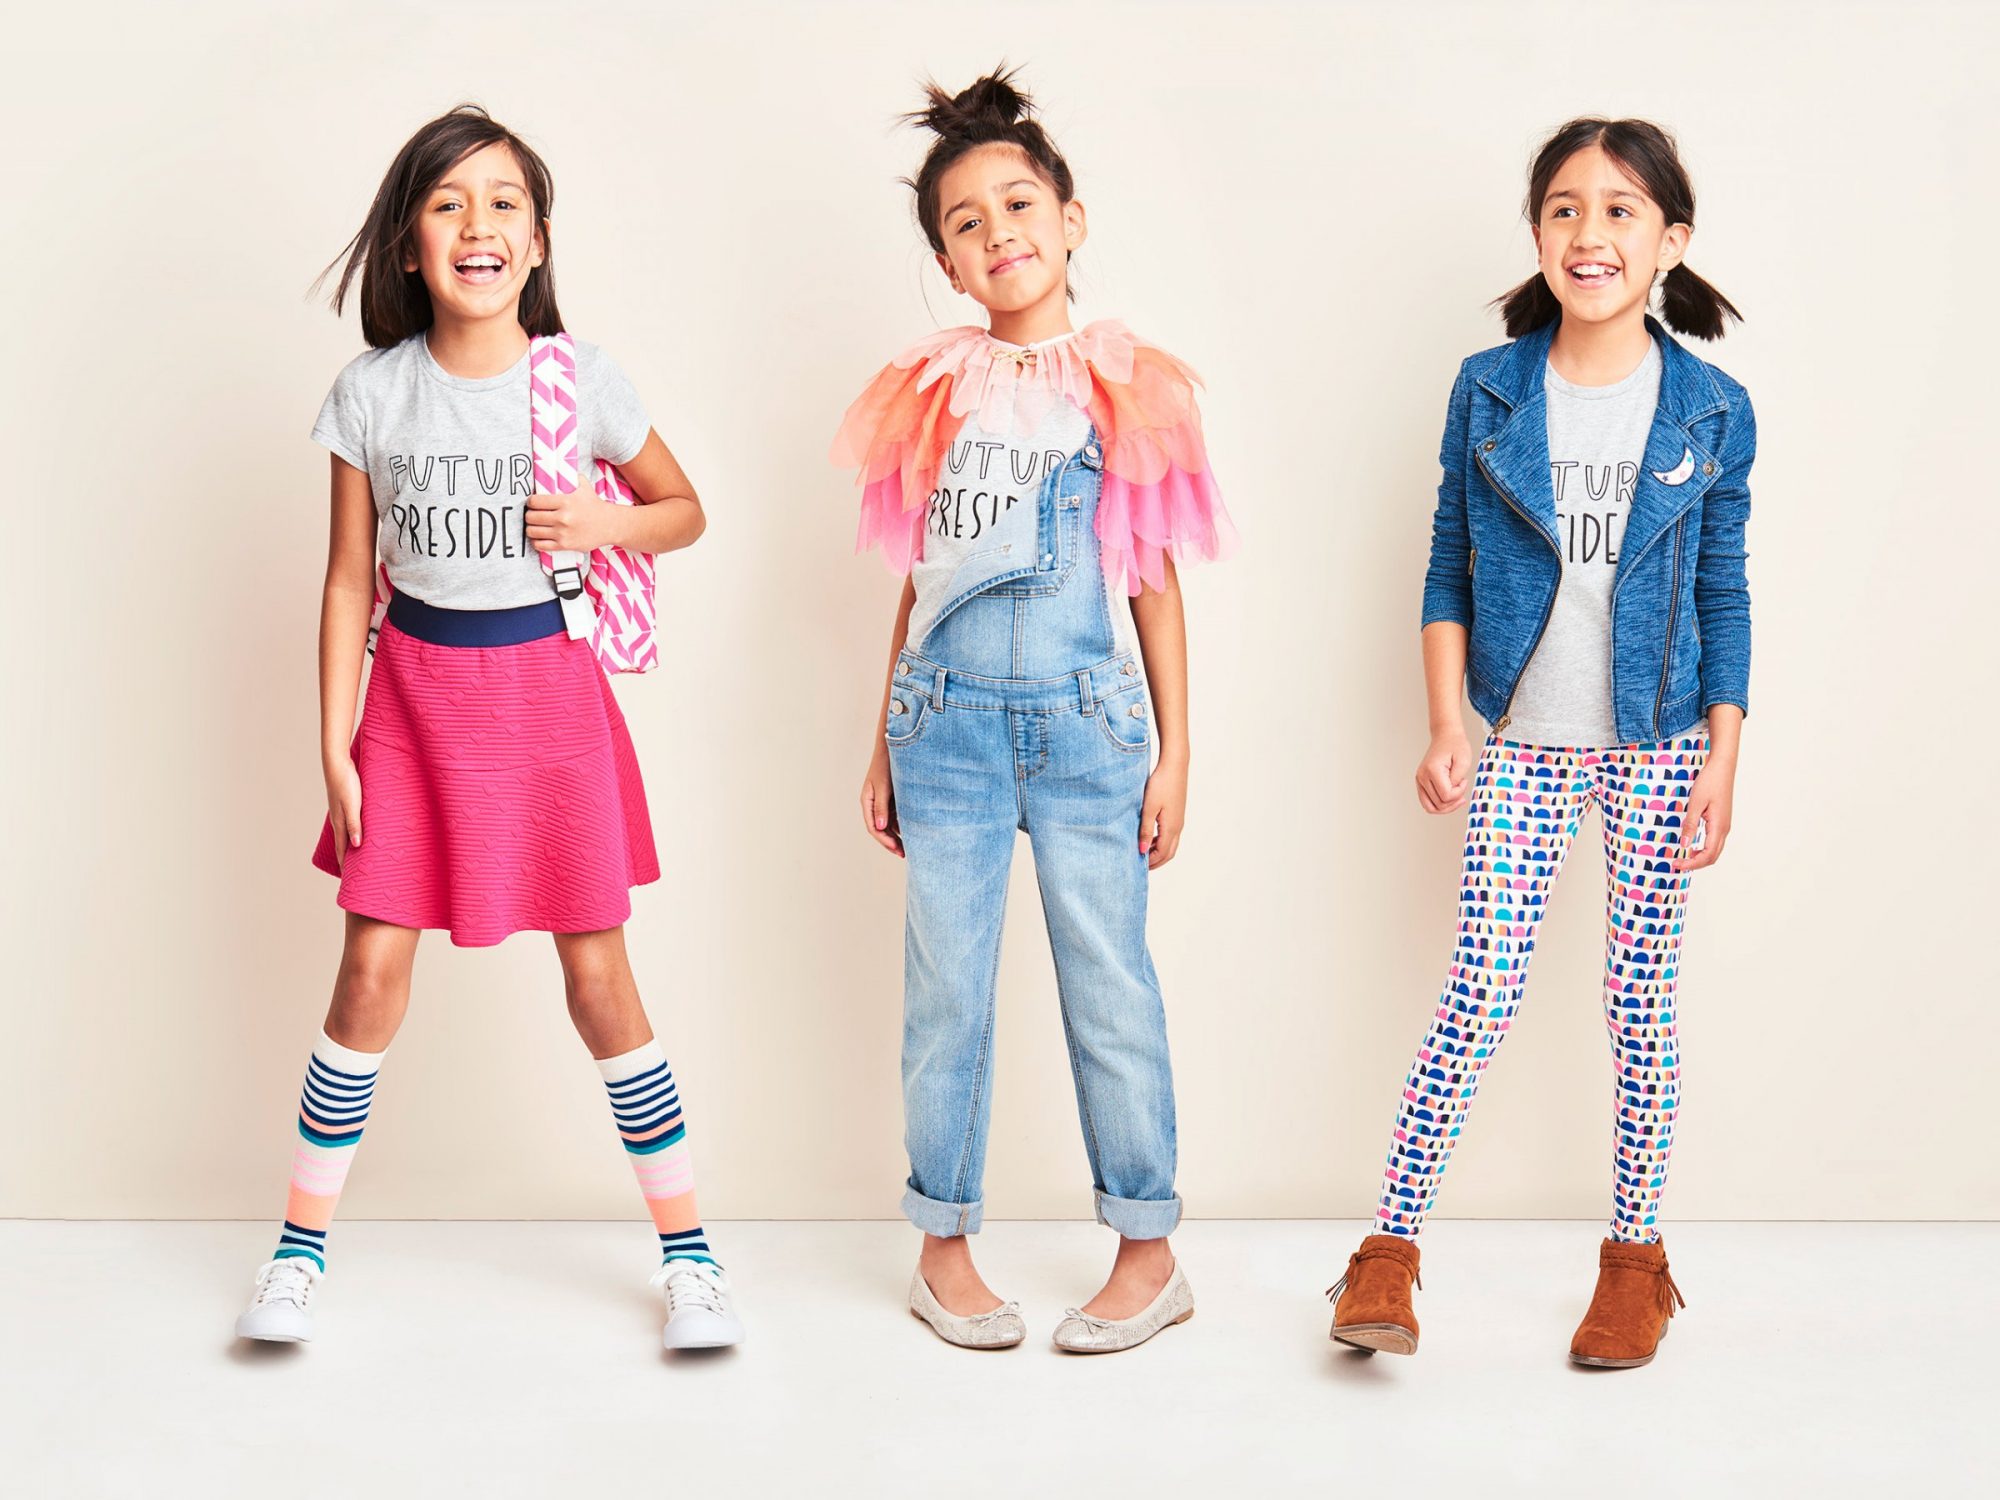 Why Target's New Kid's Line Cat & Jack Is So Good